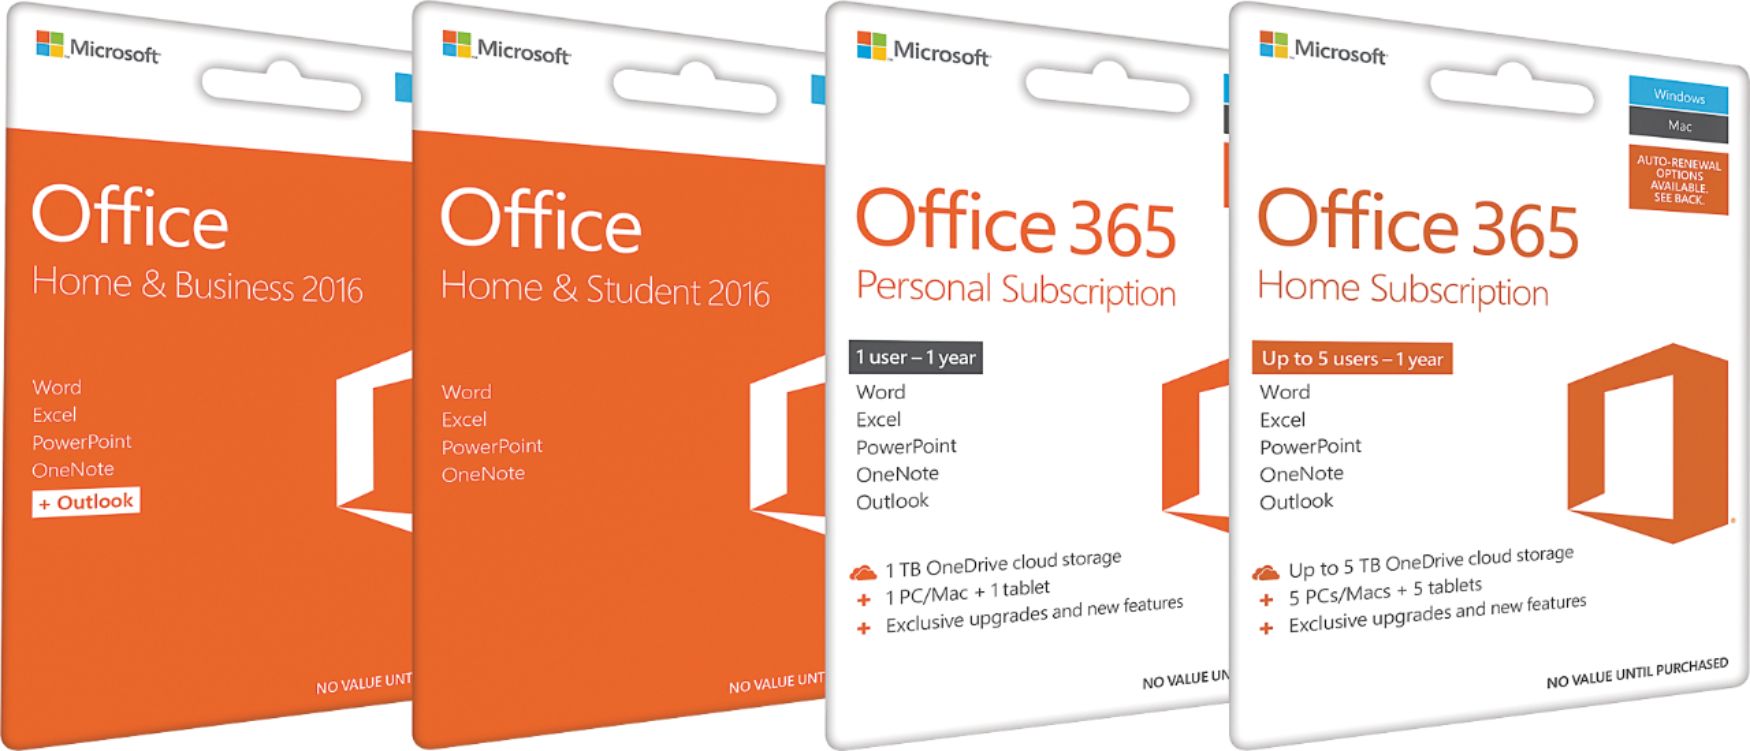 Microsoft Office 365 Personal 1 User 1 Year Cd Key UNITED STATES